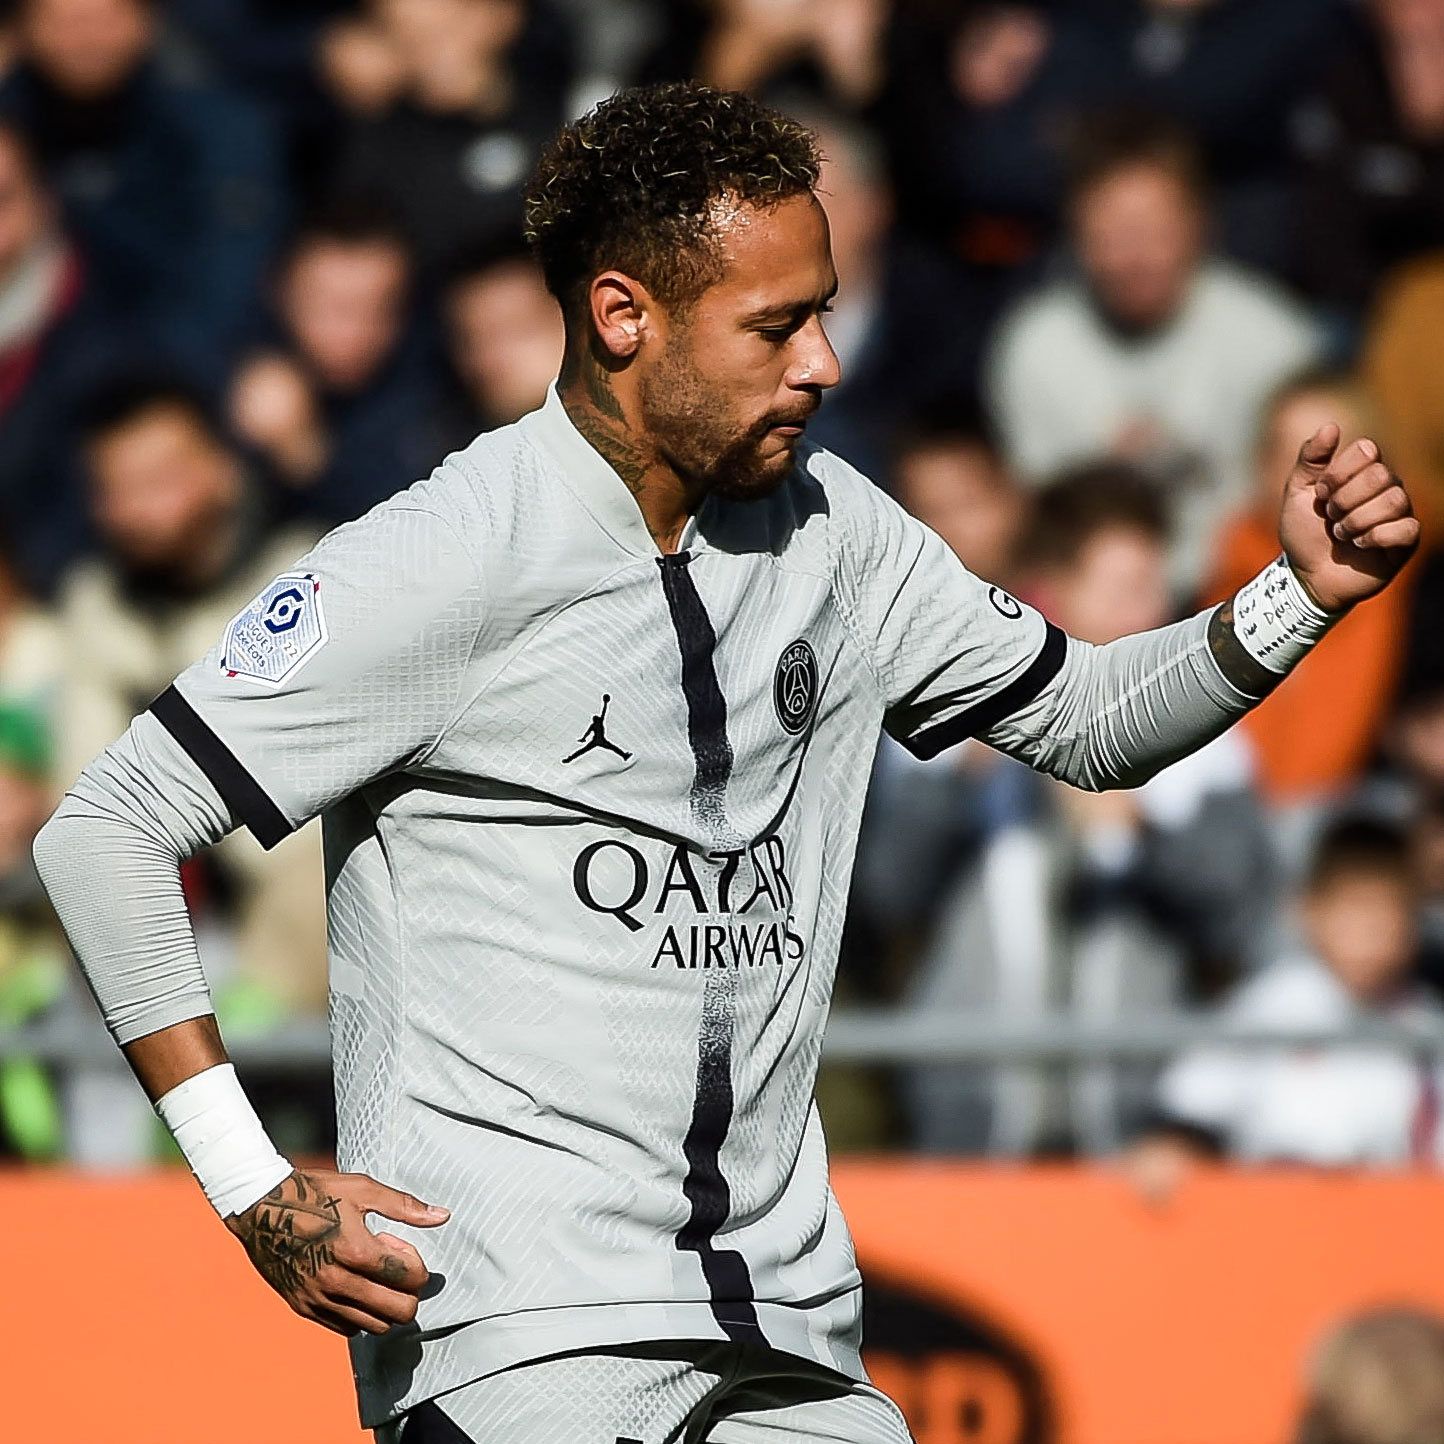 B R Football Neymar Goal. Another Neymar Assist. Another PSG Win. PSG Are Now 30 Games Unbeaten In All Comps